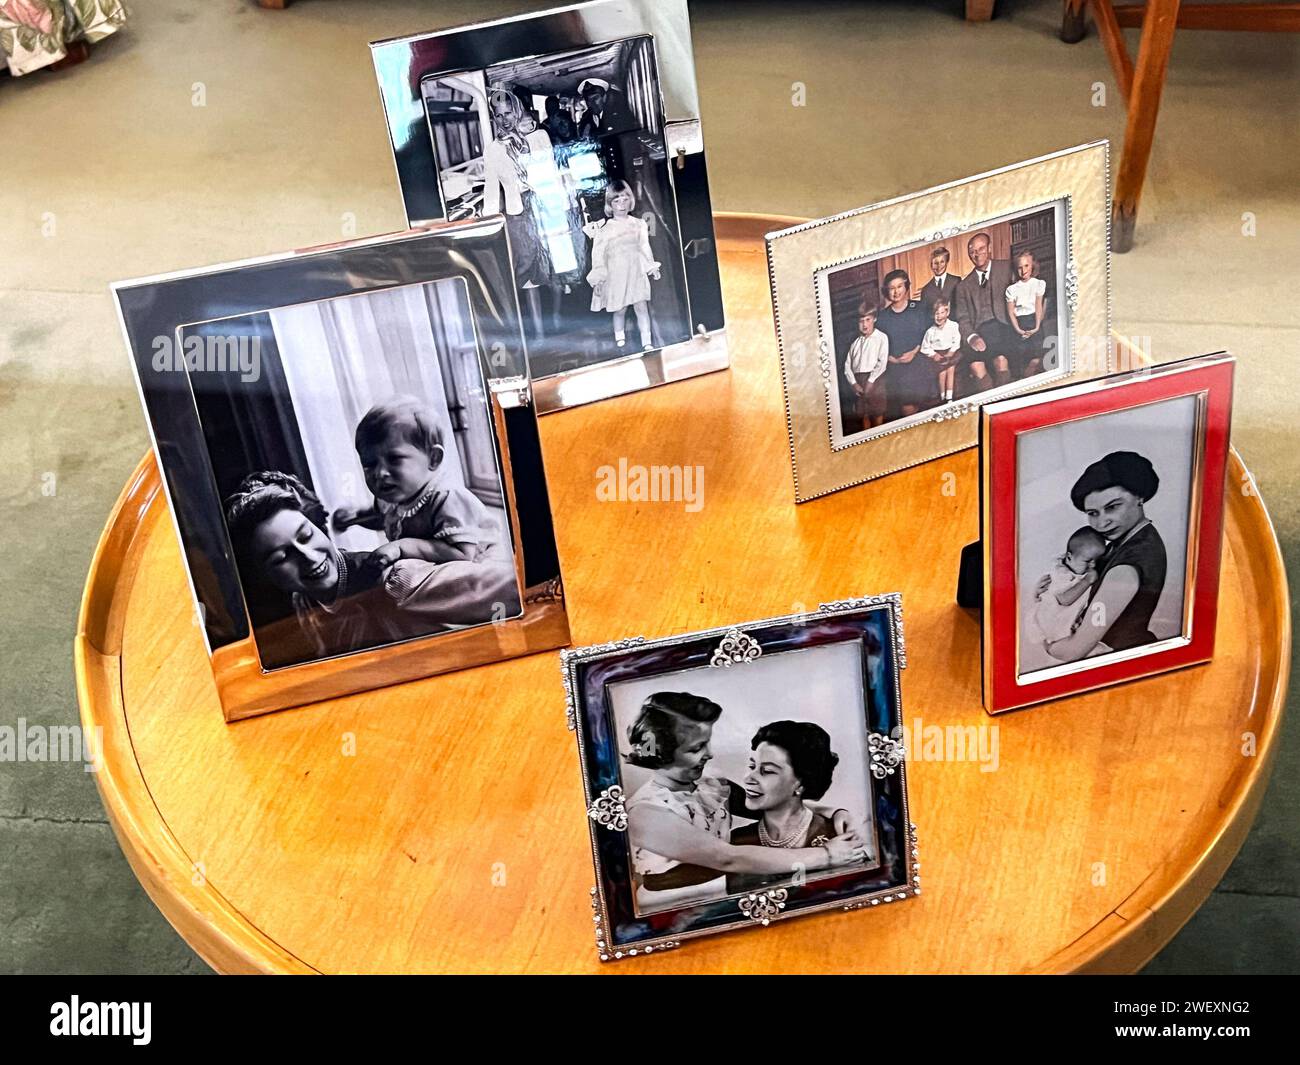 Framed Photos Arranged On A Table In Queen Elizabeth's Office Onboard Her Majesty's Yacht Britannia Stock Photo